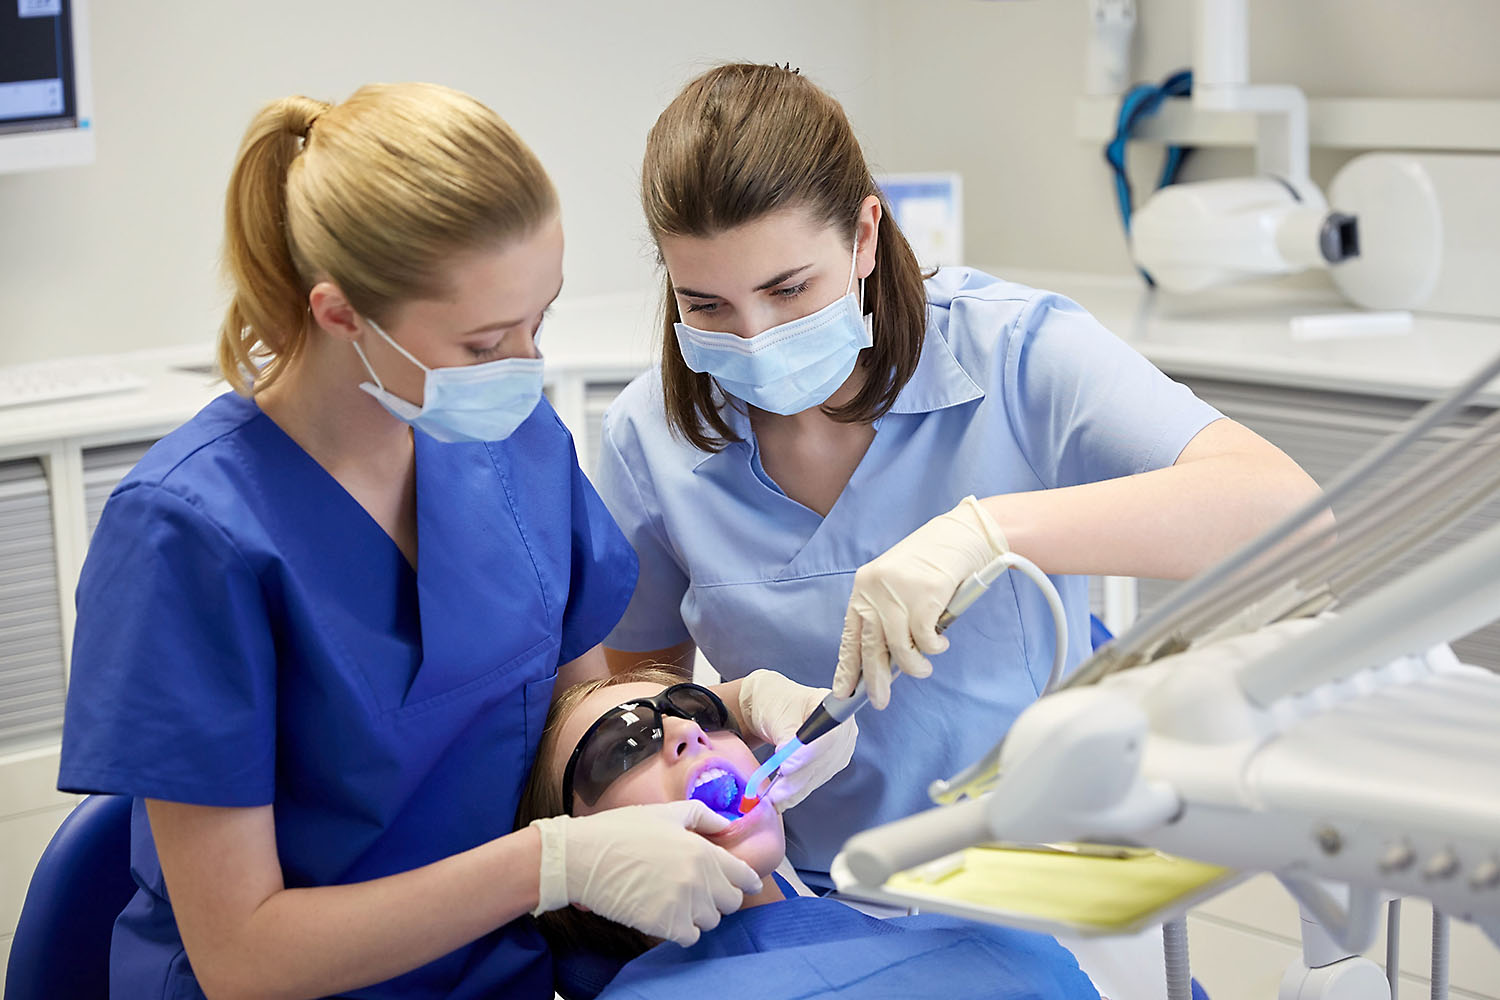 Dentist working on patient with assistant.